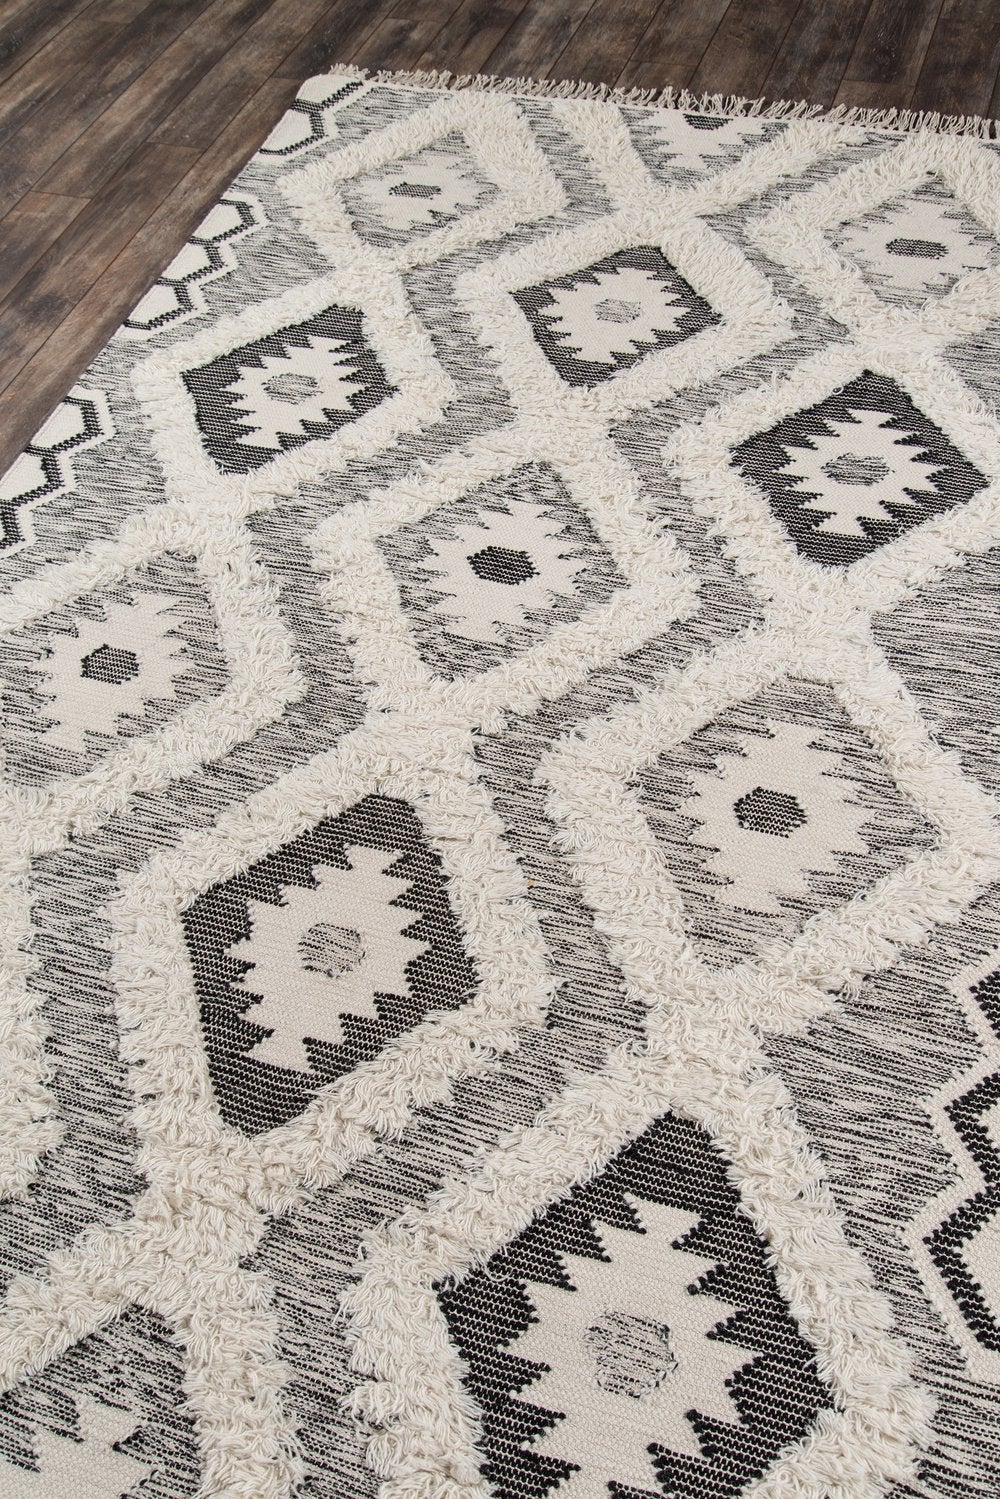 Southwestern-inspired rug with gray and black diamonds